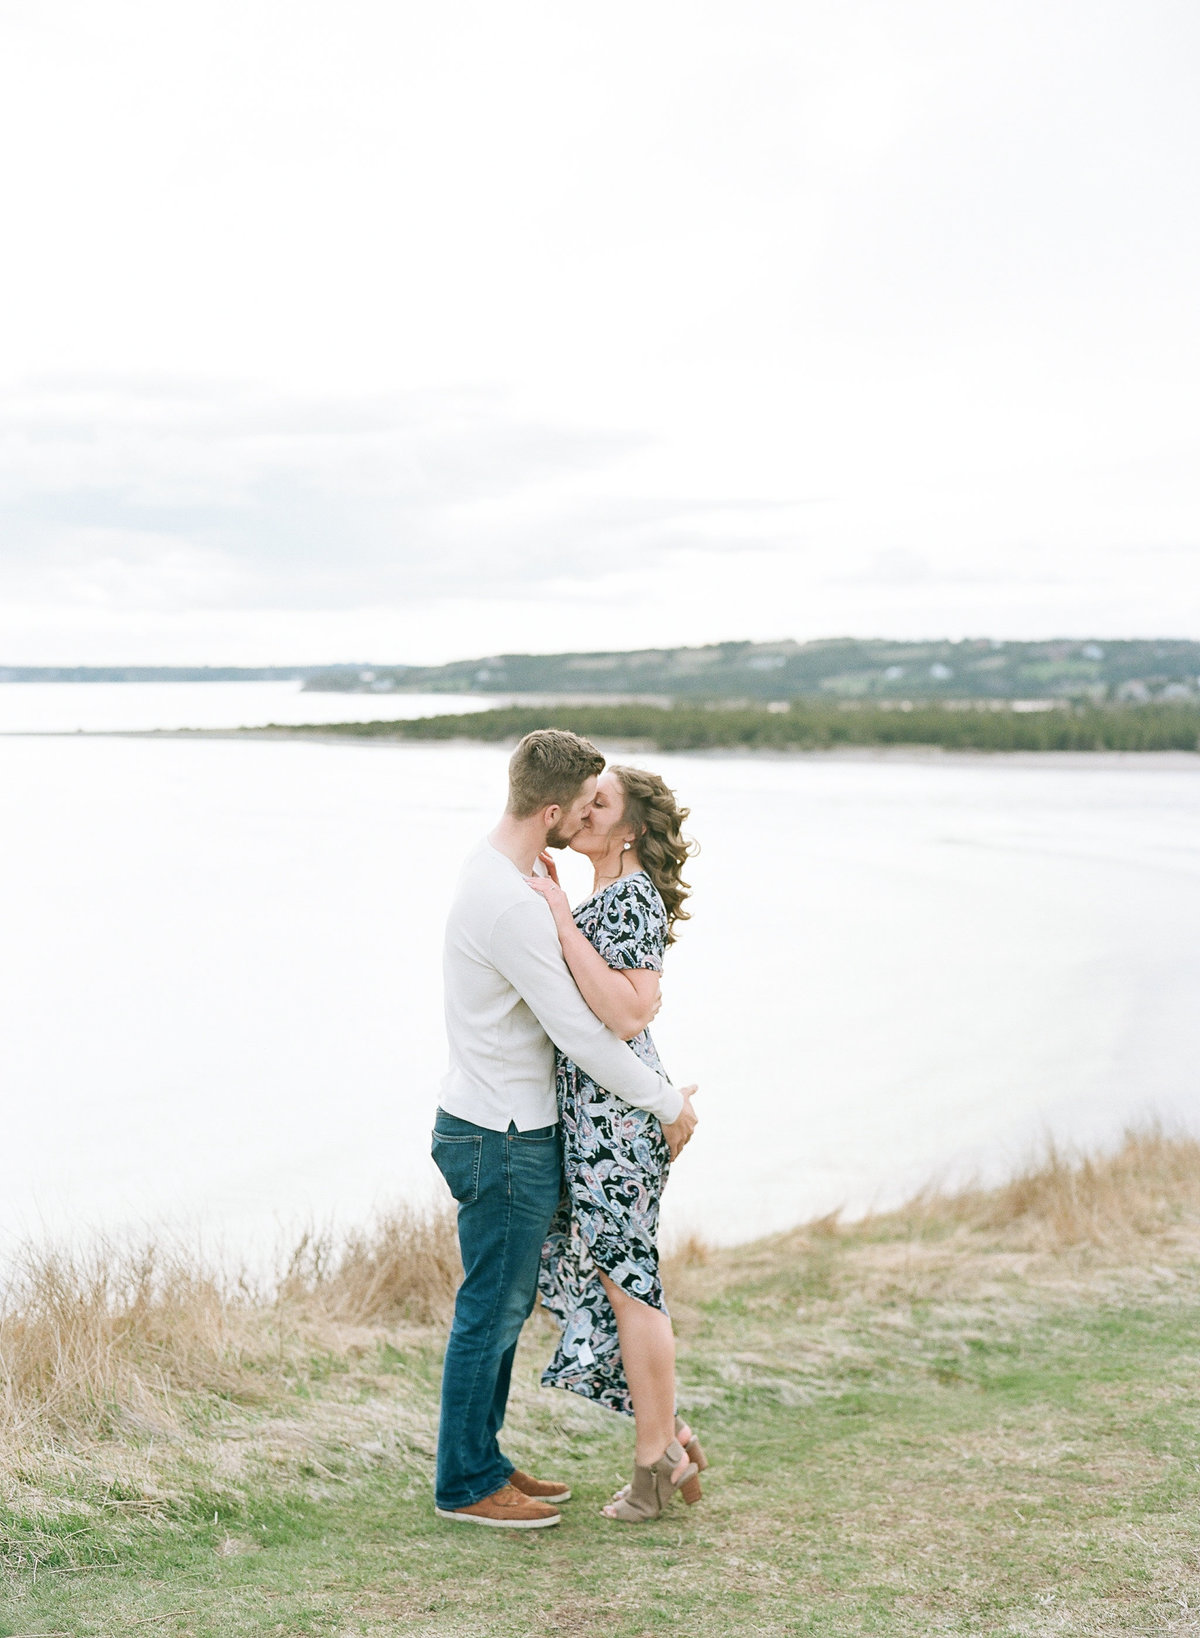 Jacqueline Anne Photography - Akayla and Andrew - Lawrencetown Beach-77